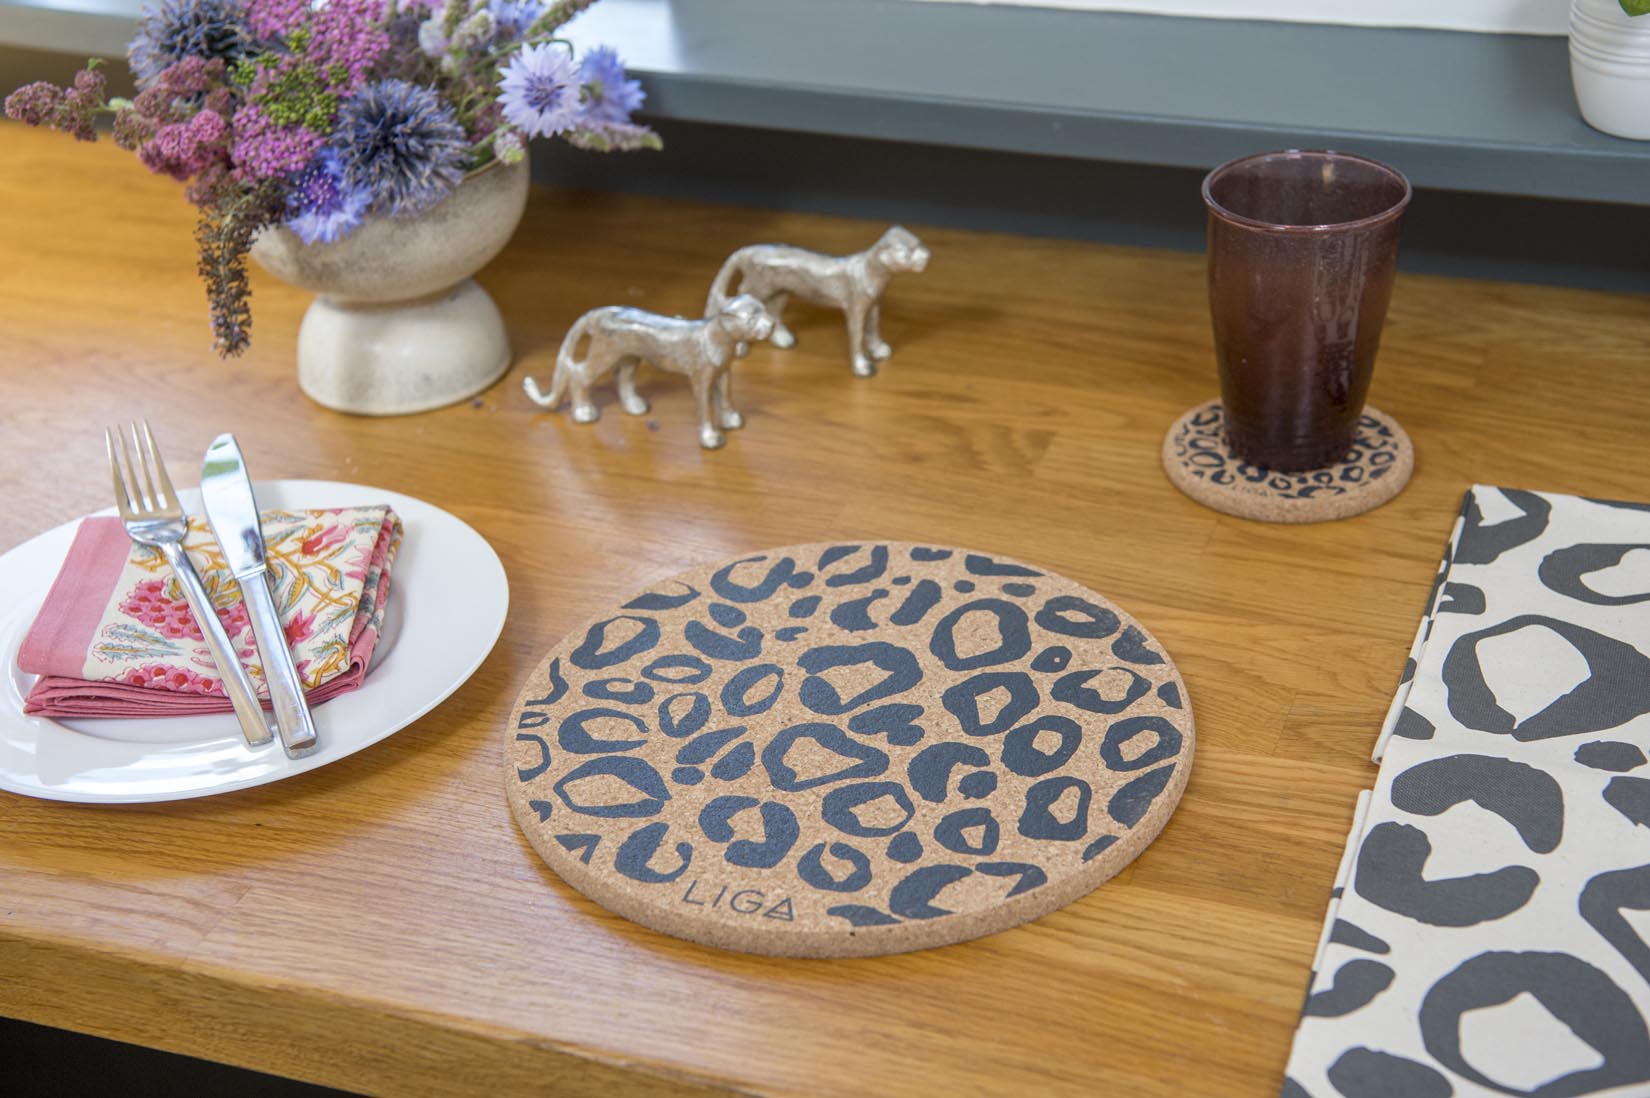 Leopard gift set- placemat coasters and kitchen items - Natalia Willmott